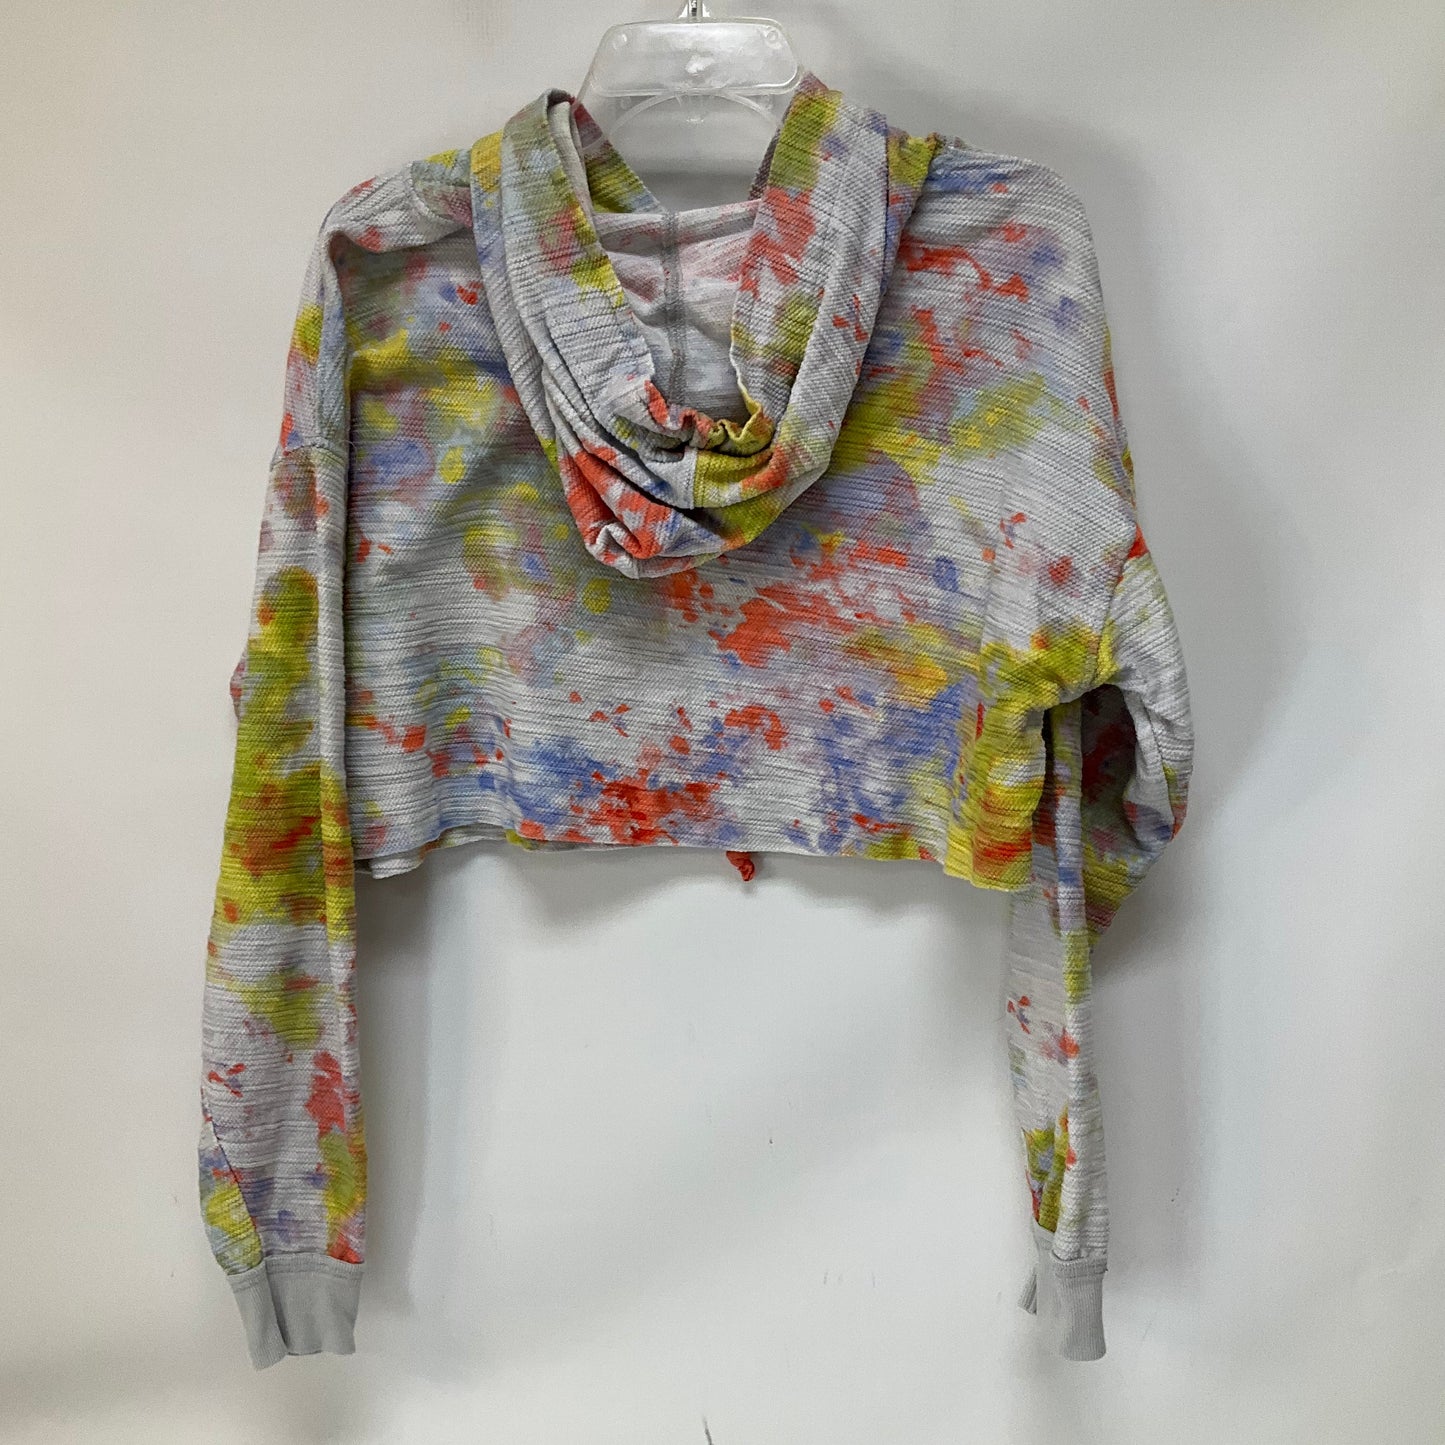 Multi-colored Athletic Top Long Sleeve Crewneck Free People, Size Xs